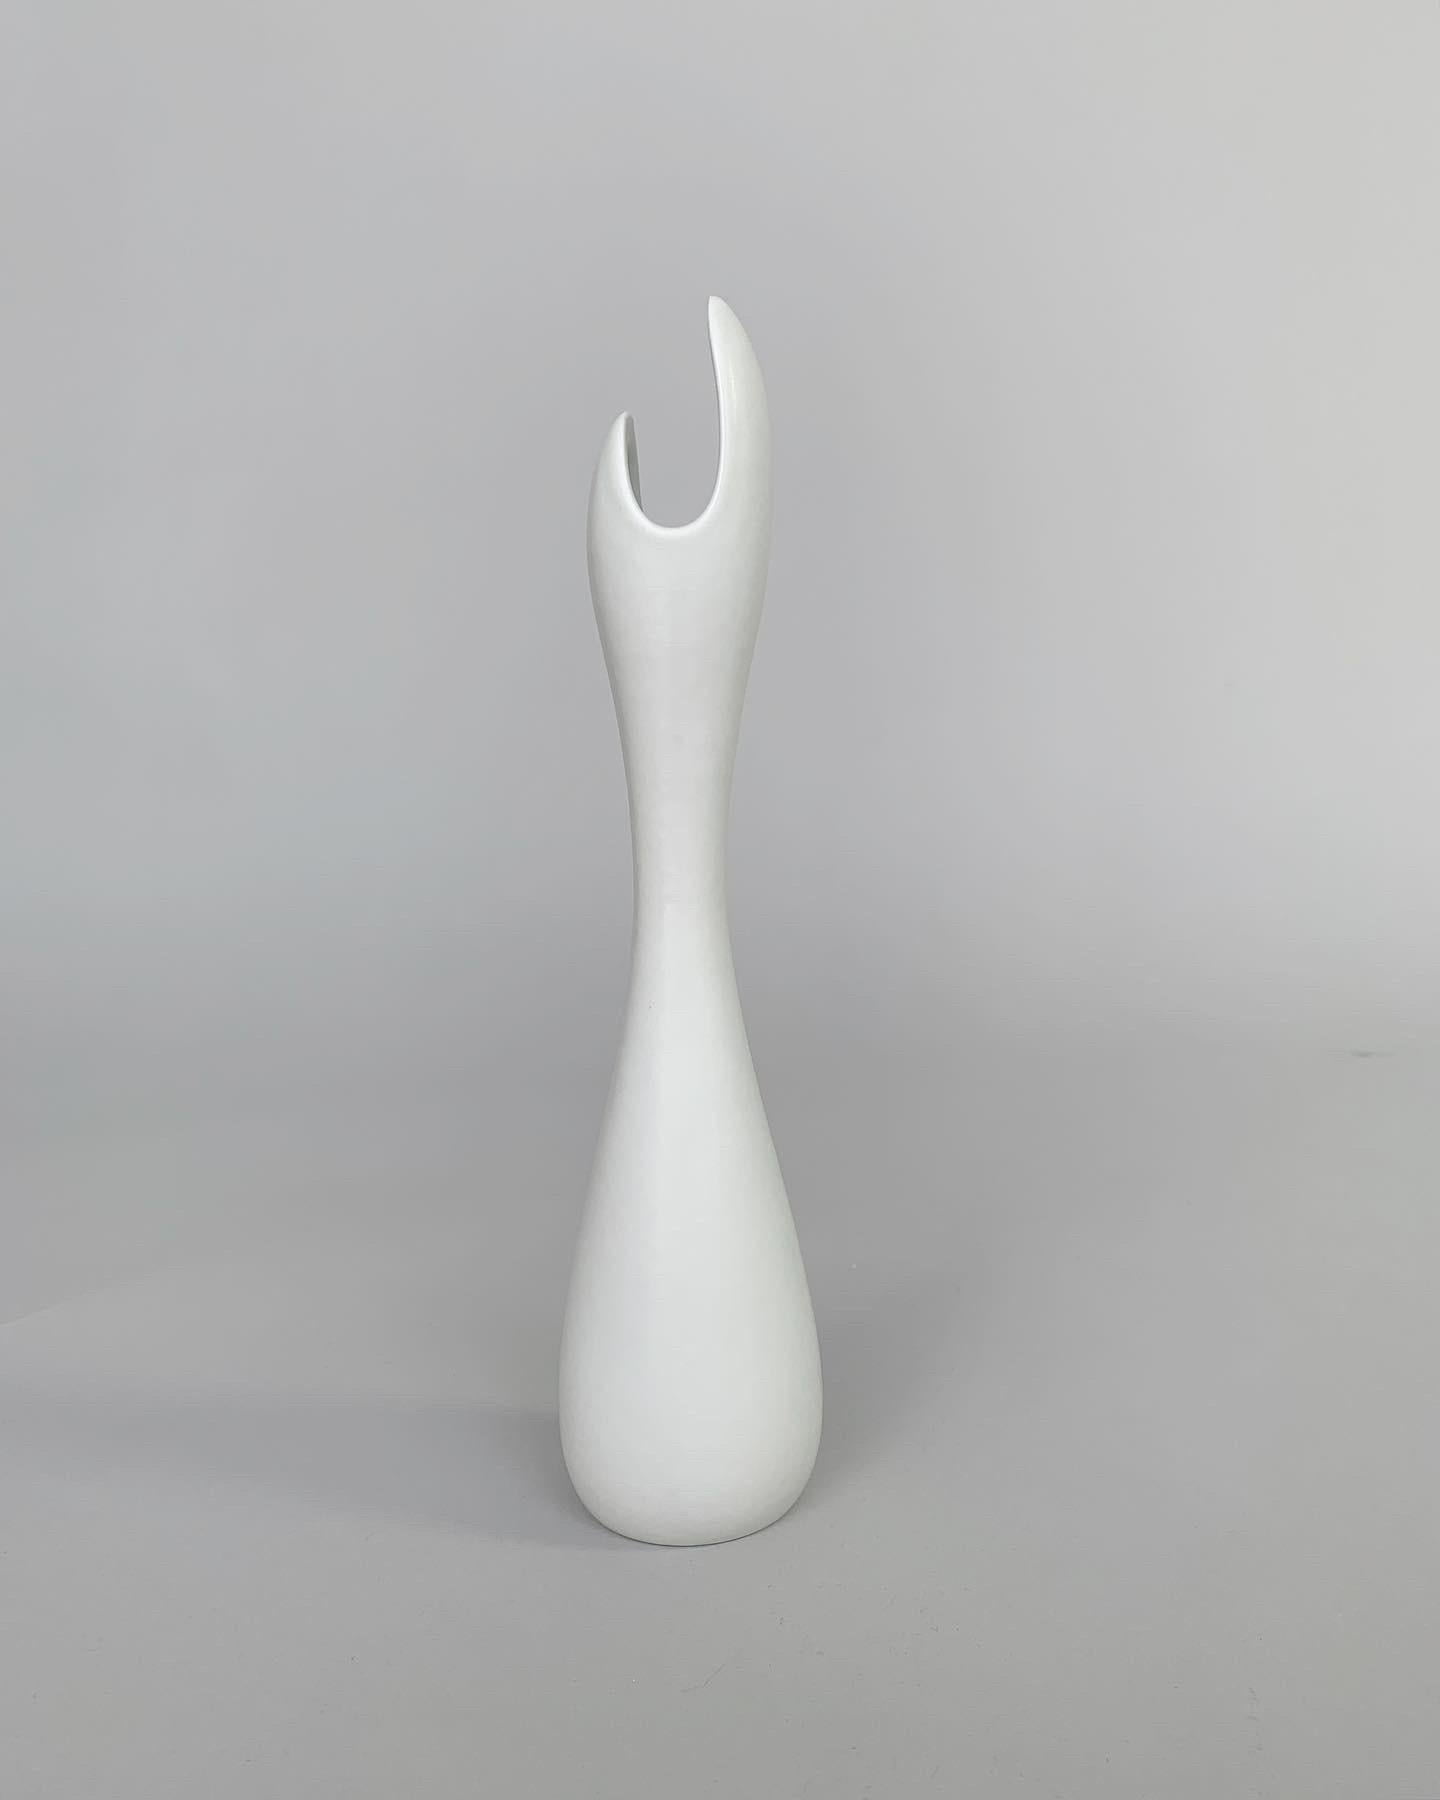 Gunnar Nylund ‚Caolina‘ vase in white glazed stoneware, designed in 1955 for Rörstrand factory in Sweden.

1st class quality sorting, very good condition.

Height: 26.5 cm
Diameter: 6 cm